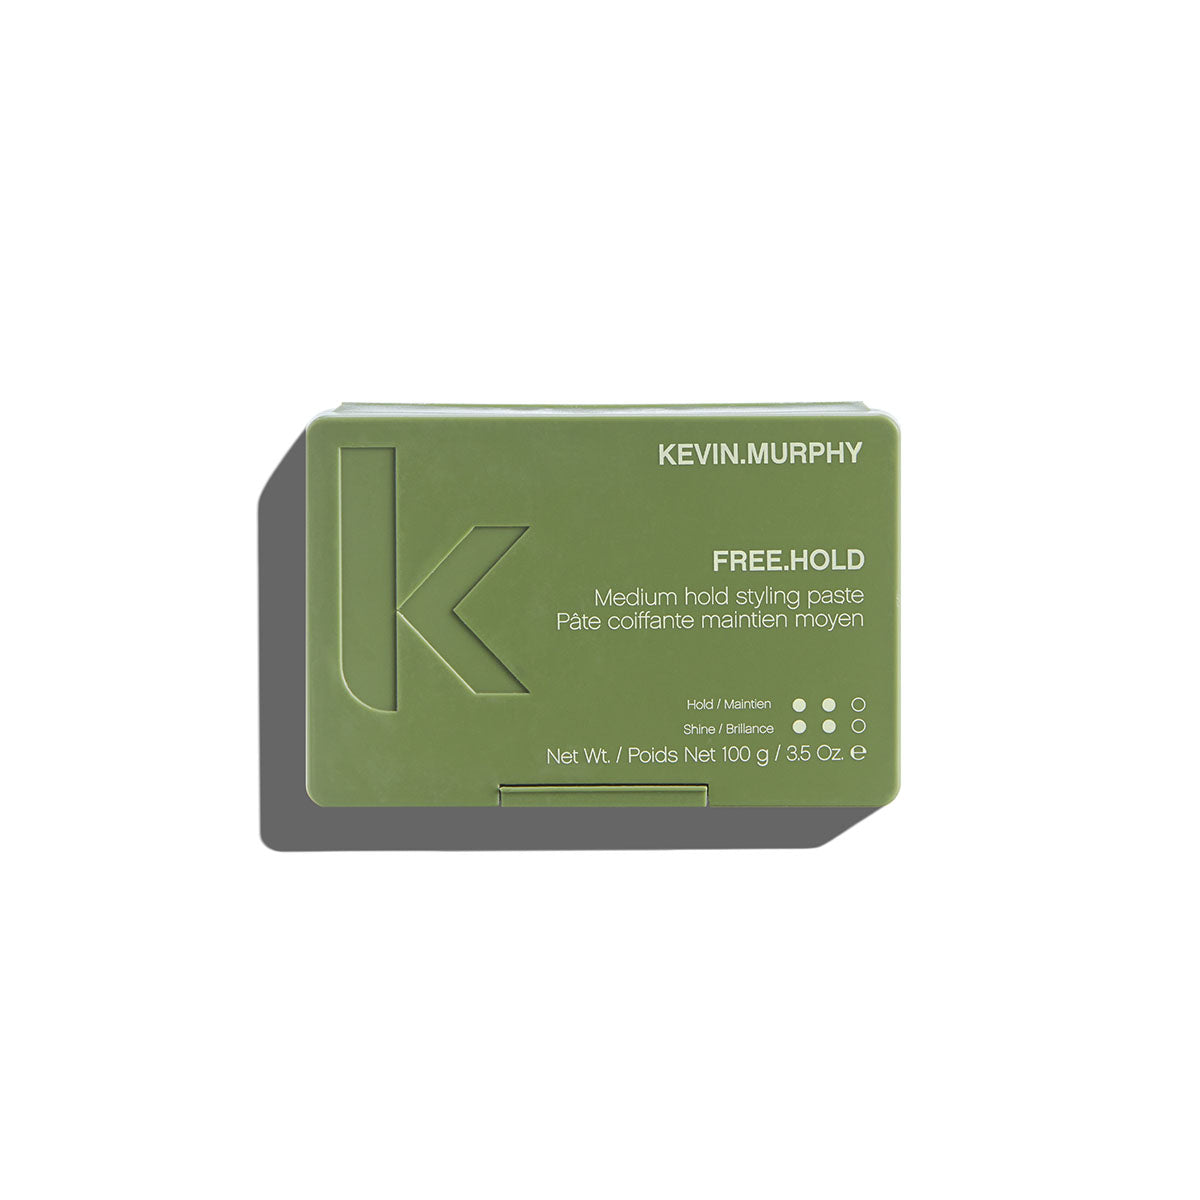 KEVIN.MURPHY Free Hold 100g